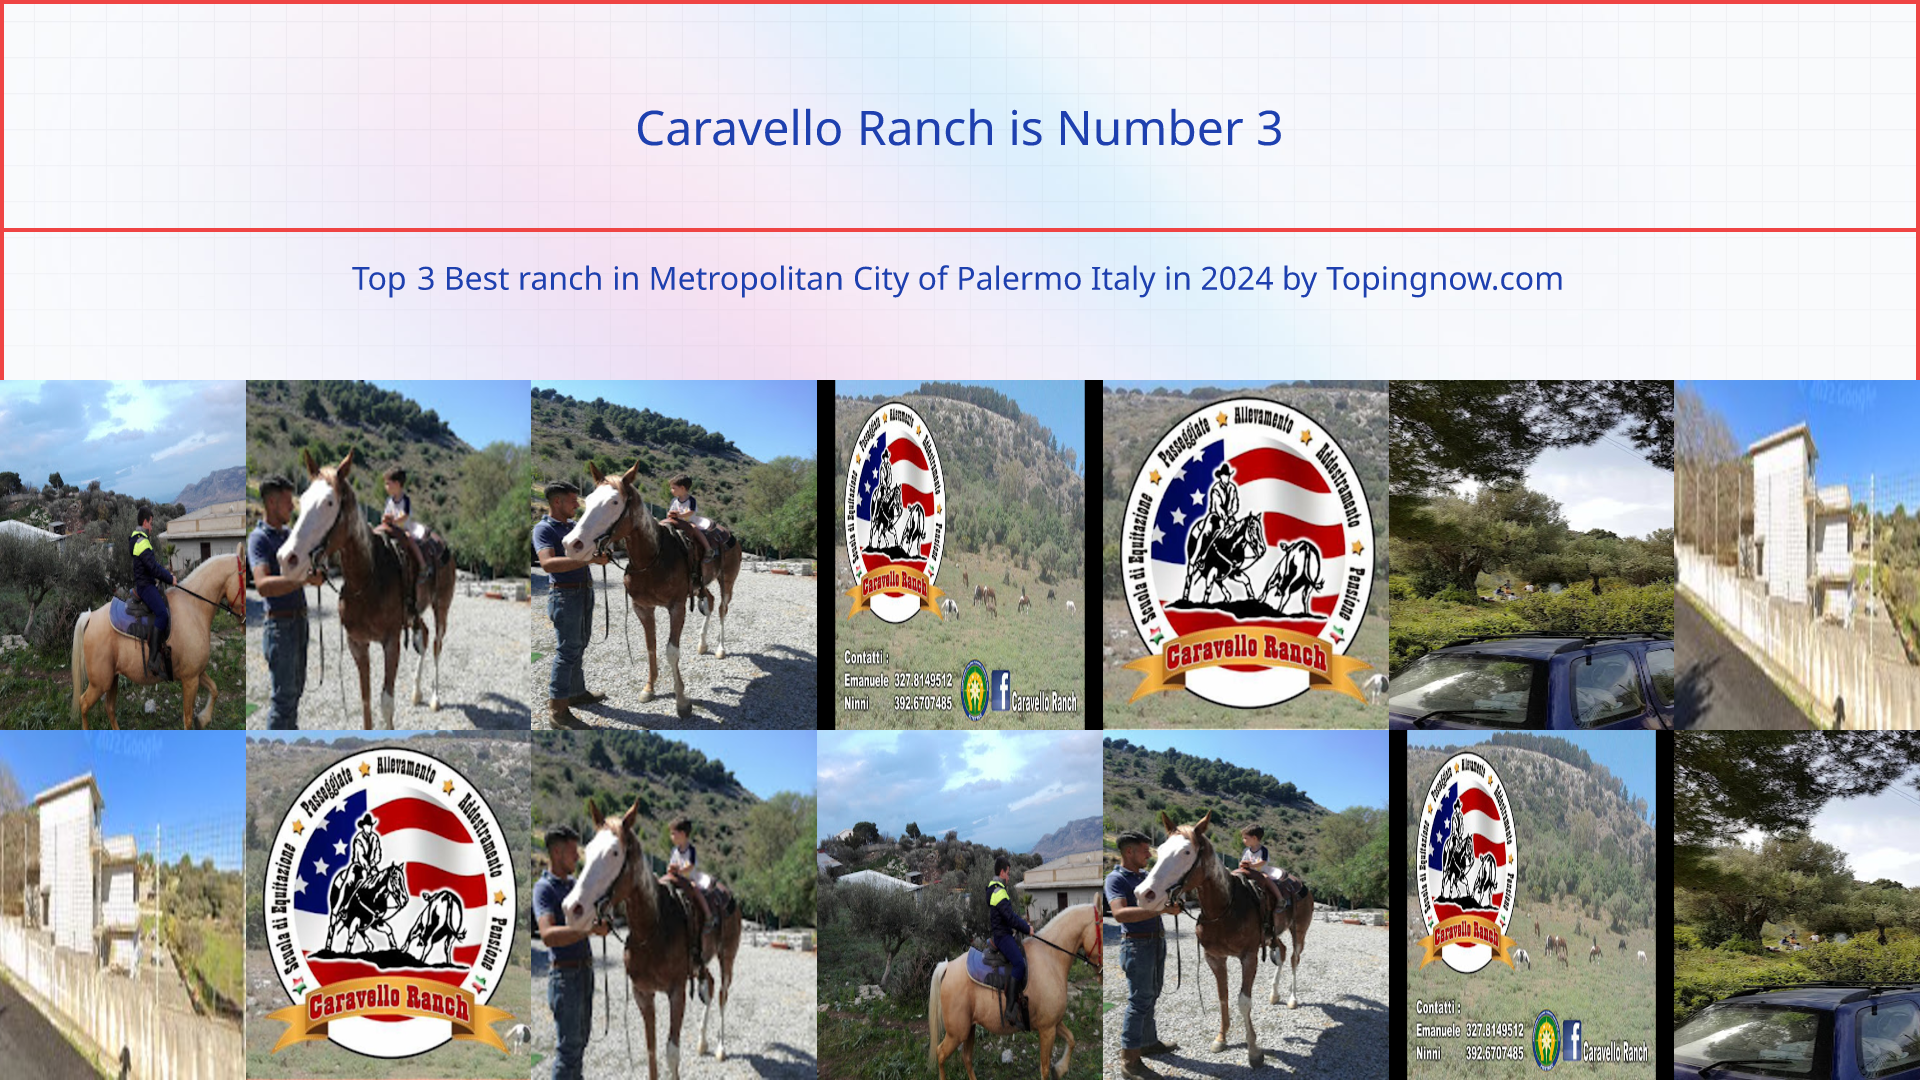 Caravello Ranch: Top 3 Best ranch in Metropolitan City of Palermo Italy in 2024